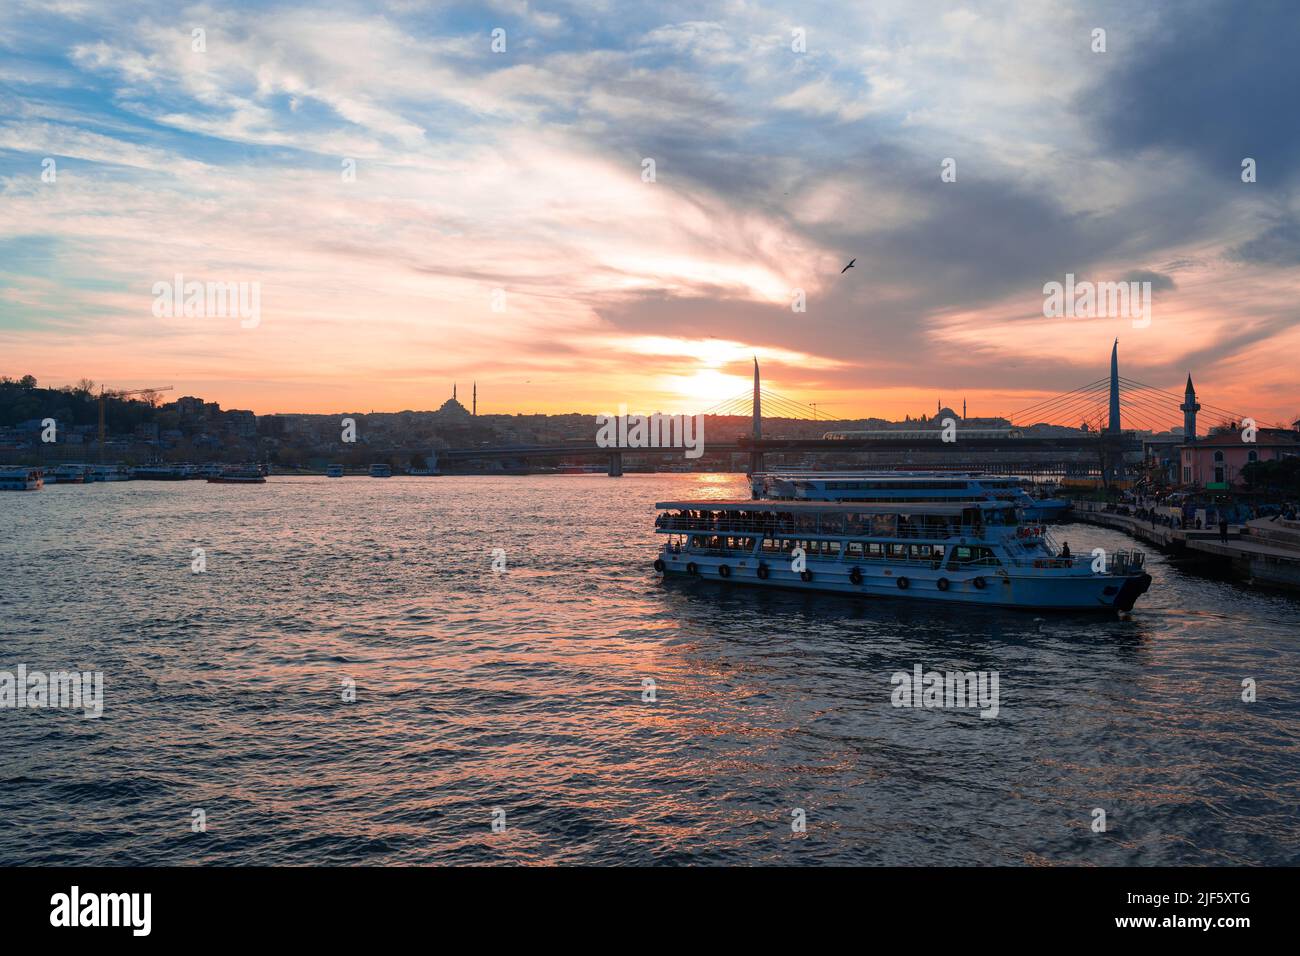 Boats in sea and scenic sunset in Istanbul Stock Photo